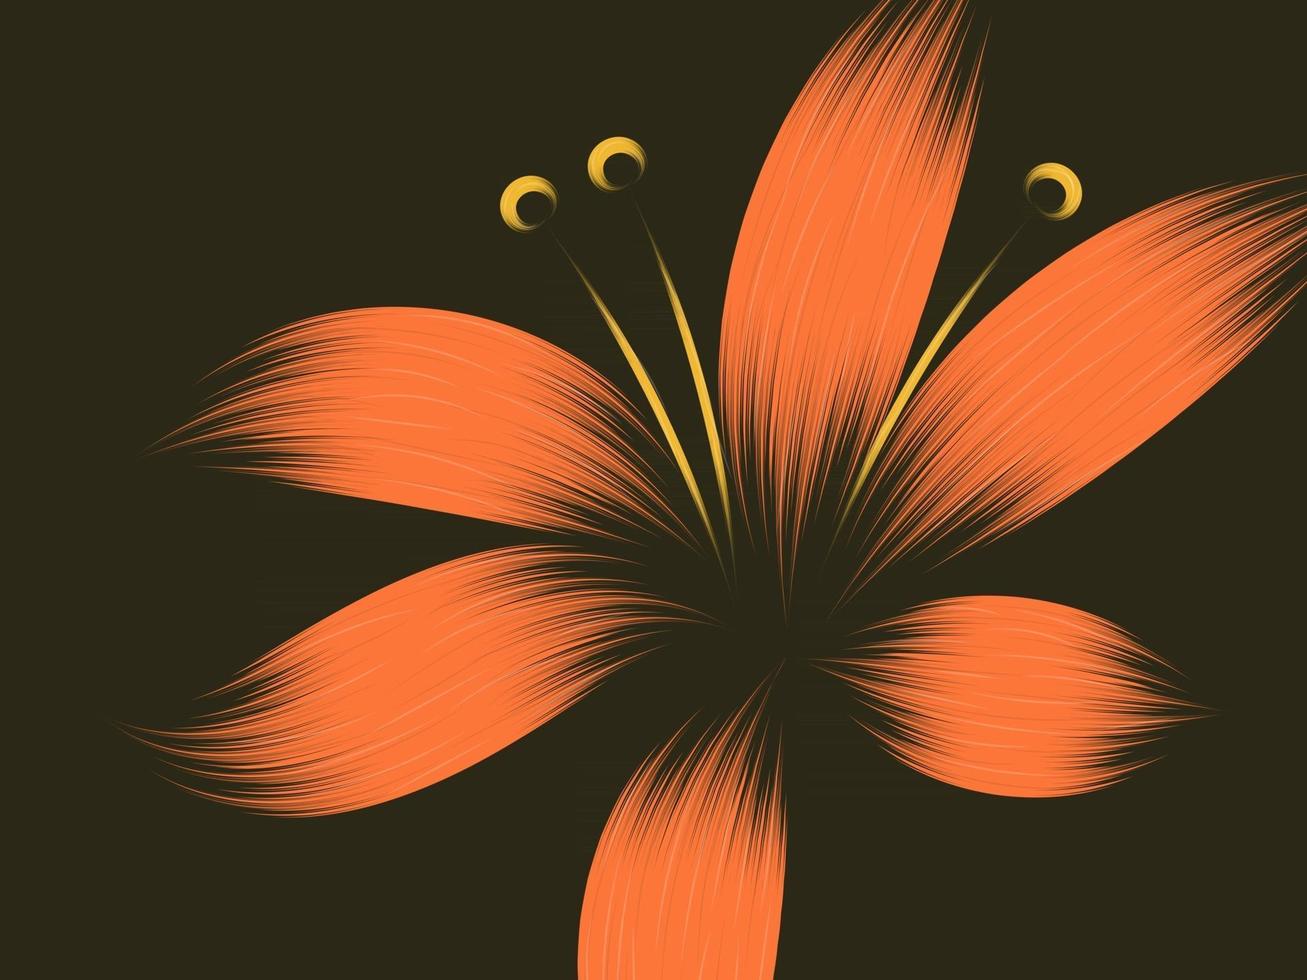 Flower Abstract Background vector